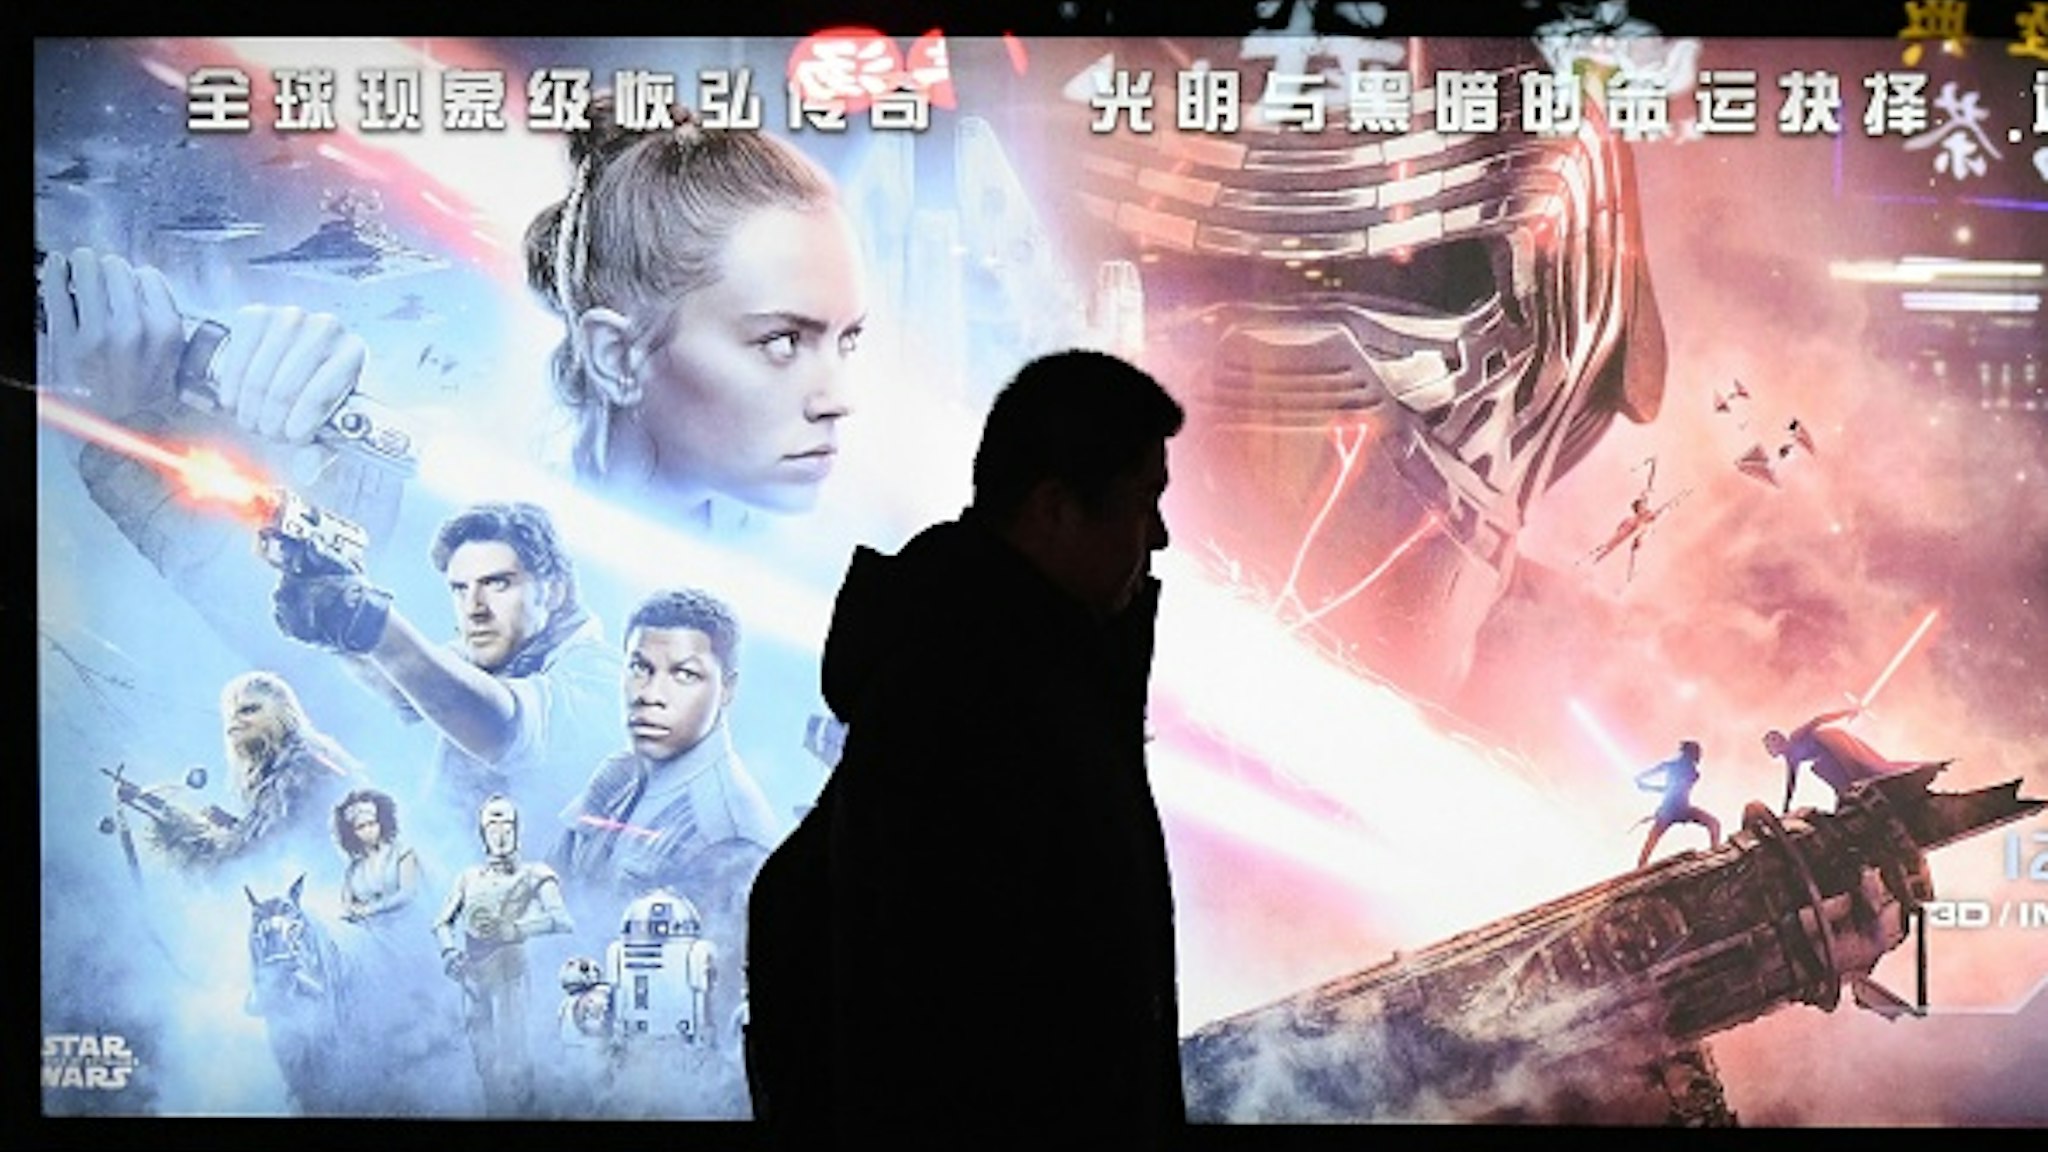 This photo taken on December 19, 2019 shows a man walking past a poster for the latest Star Wars movie, "The Rise of Skywalker", in Beijing. - The movie opens in theaters in China on December 20.